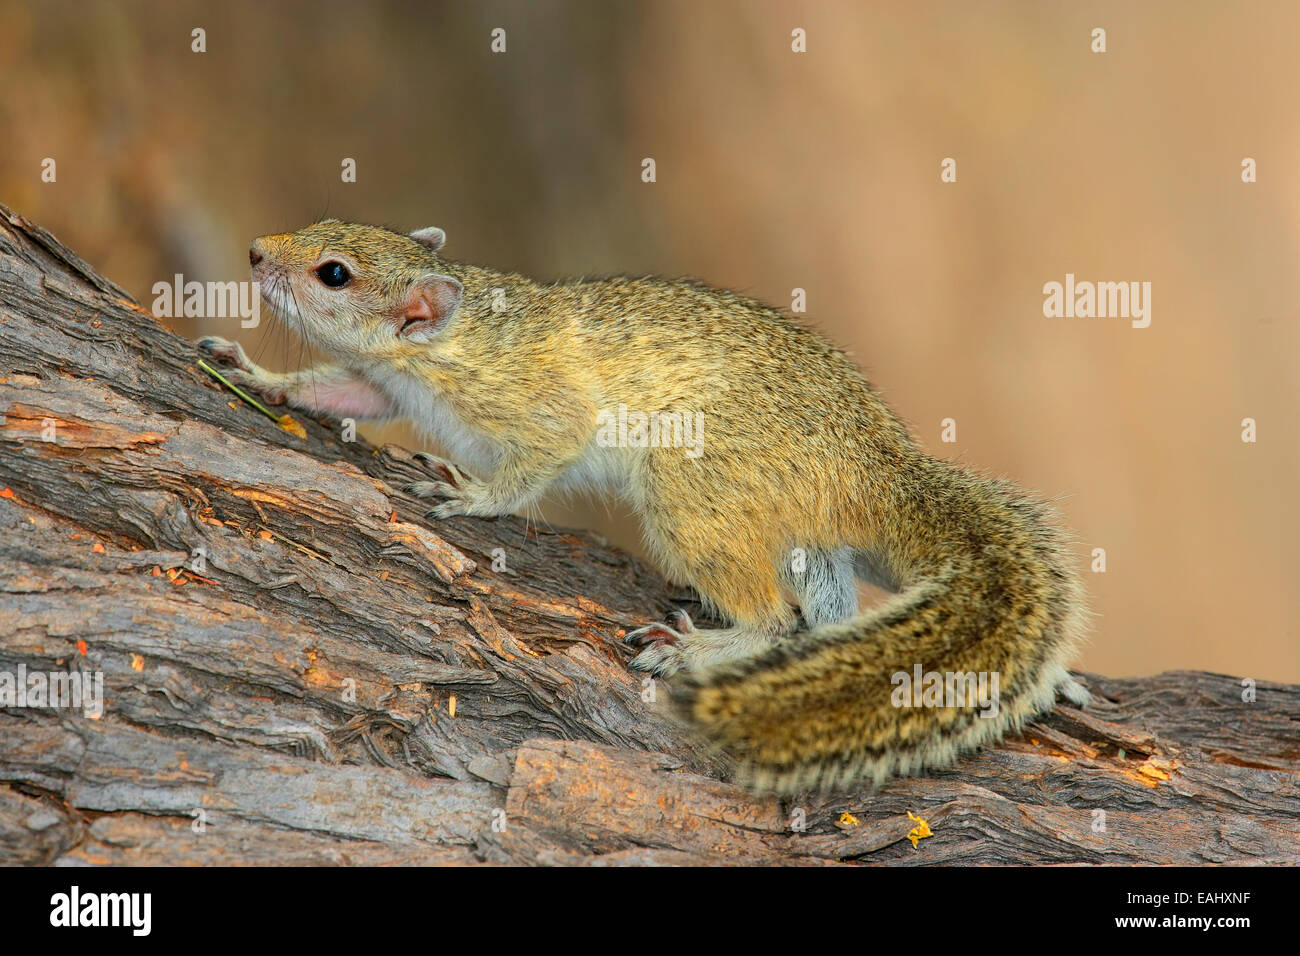 Tree squirrel (Paraxerus cepapi) sitting in a tree, South Africa Stock Photo